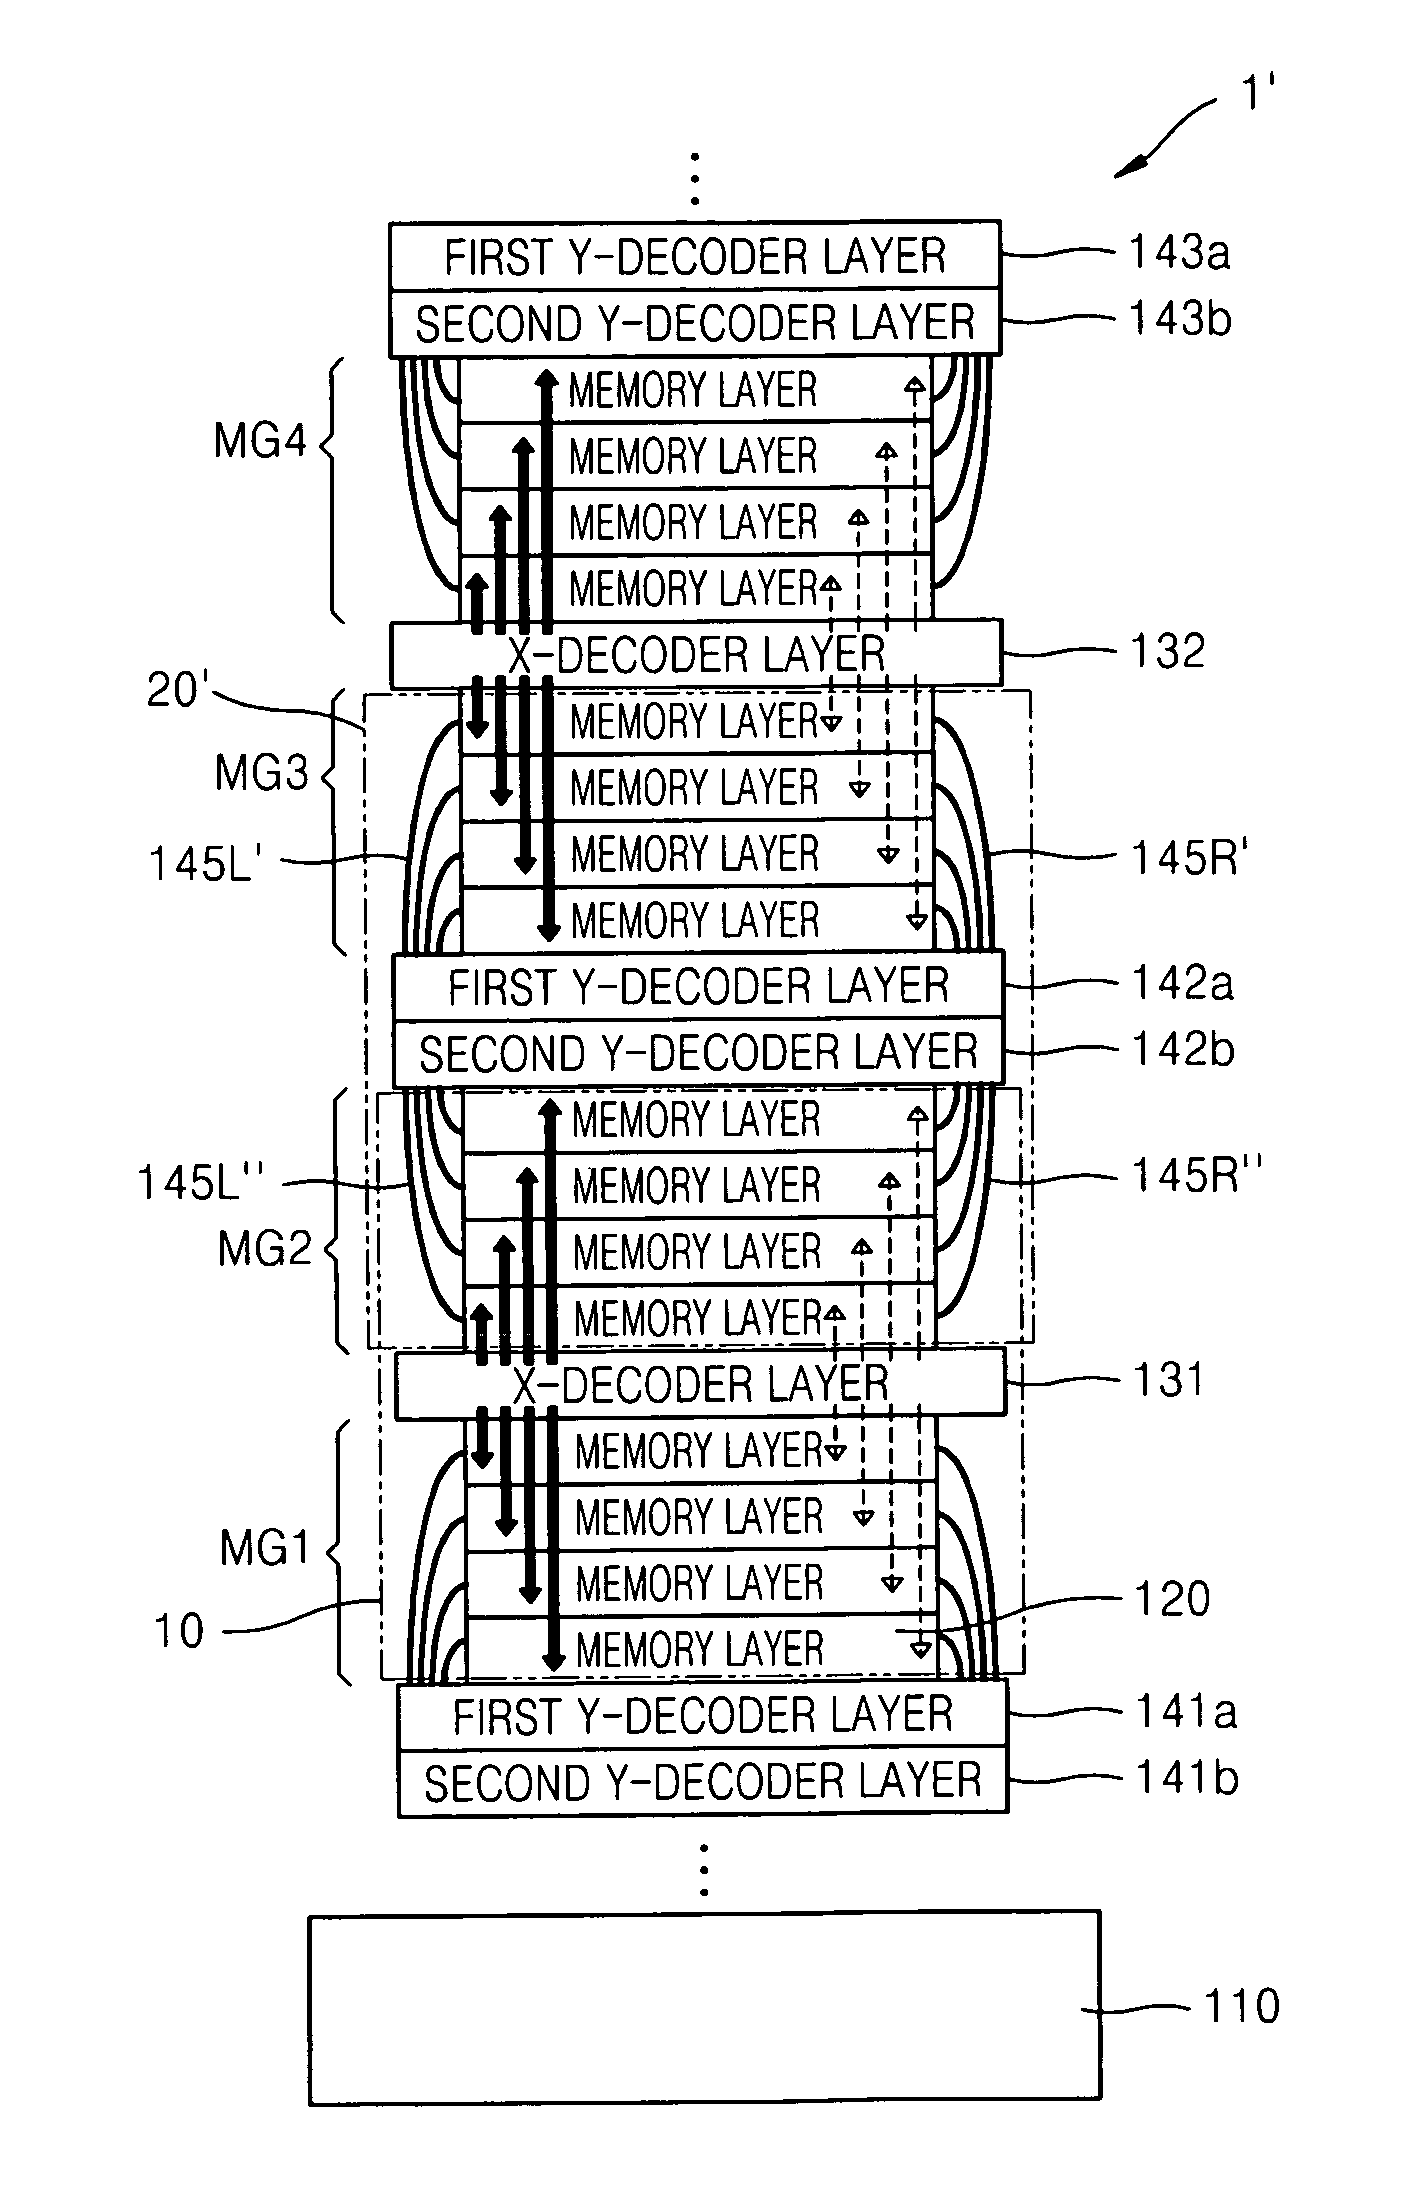 Stacked memory devices